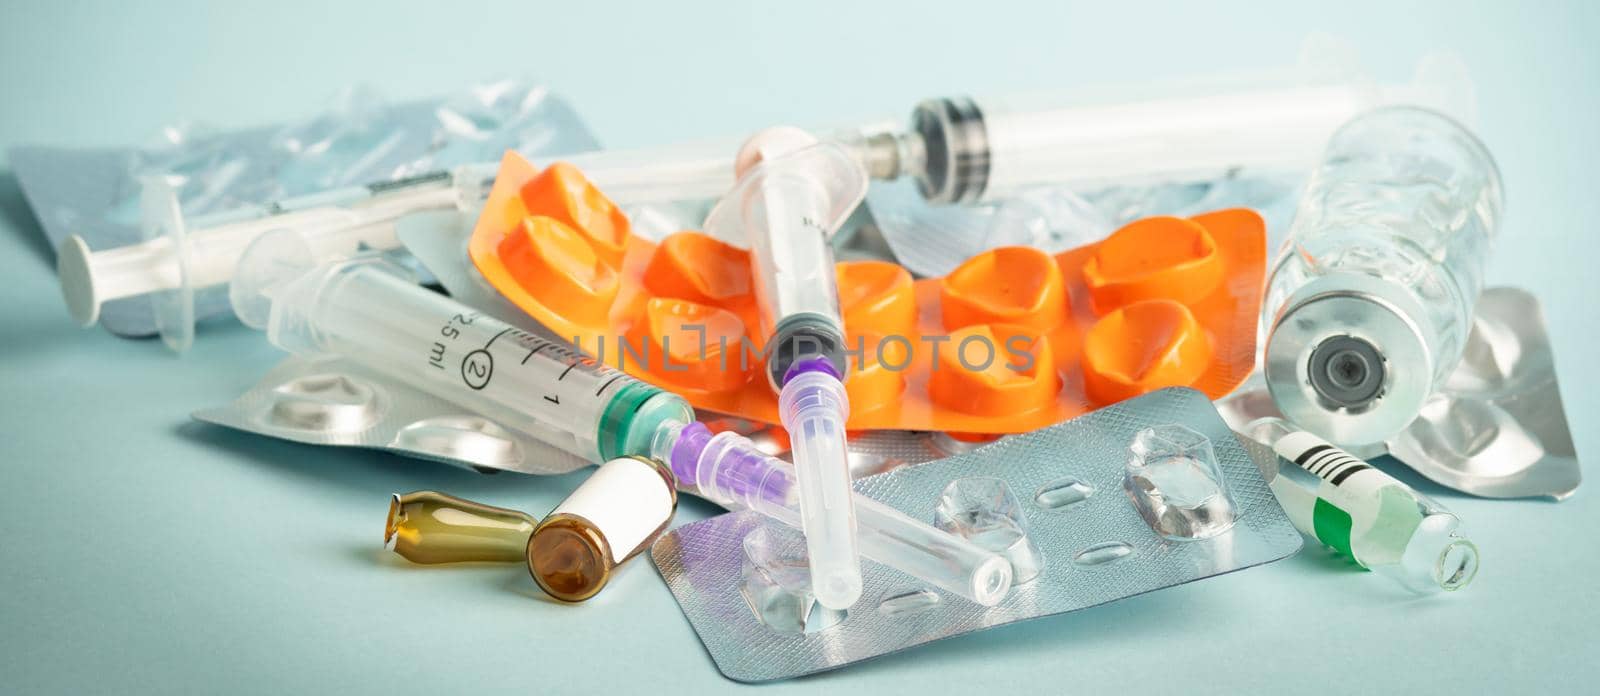 Used syringes and empty medication containers. A large number of empty medicine containers.